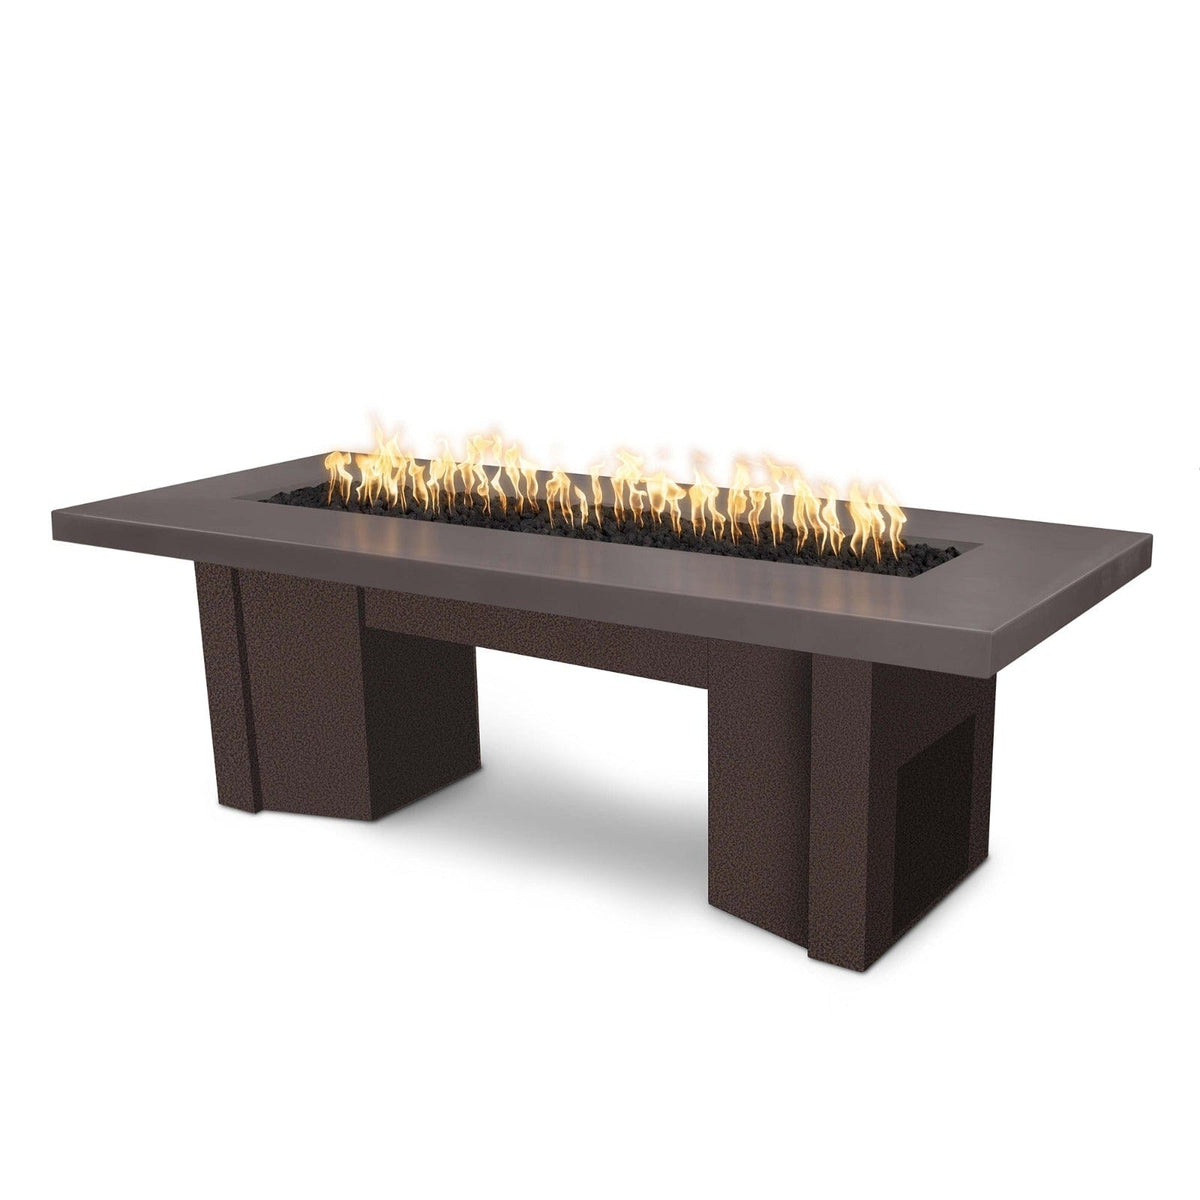 The Outdoor Plus Fire Features Chestnut (-CST) / Copper Vein Powder Coated Steel (-CPV) The Outdoor Plus 78&quot; Alameda Fire Table Smooth Concrete in Liquid Propane - Match Lit / OPT-ALMGFRC78-LP